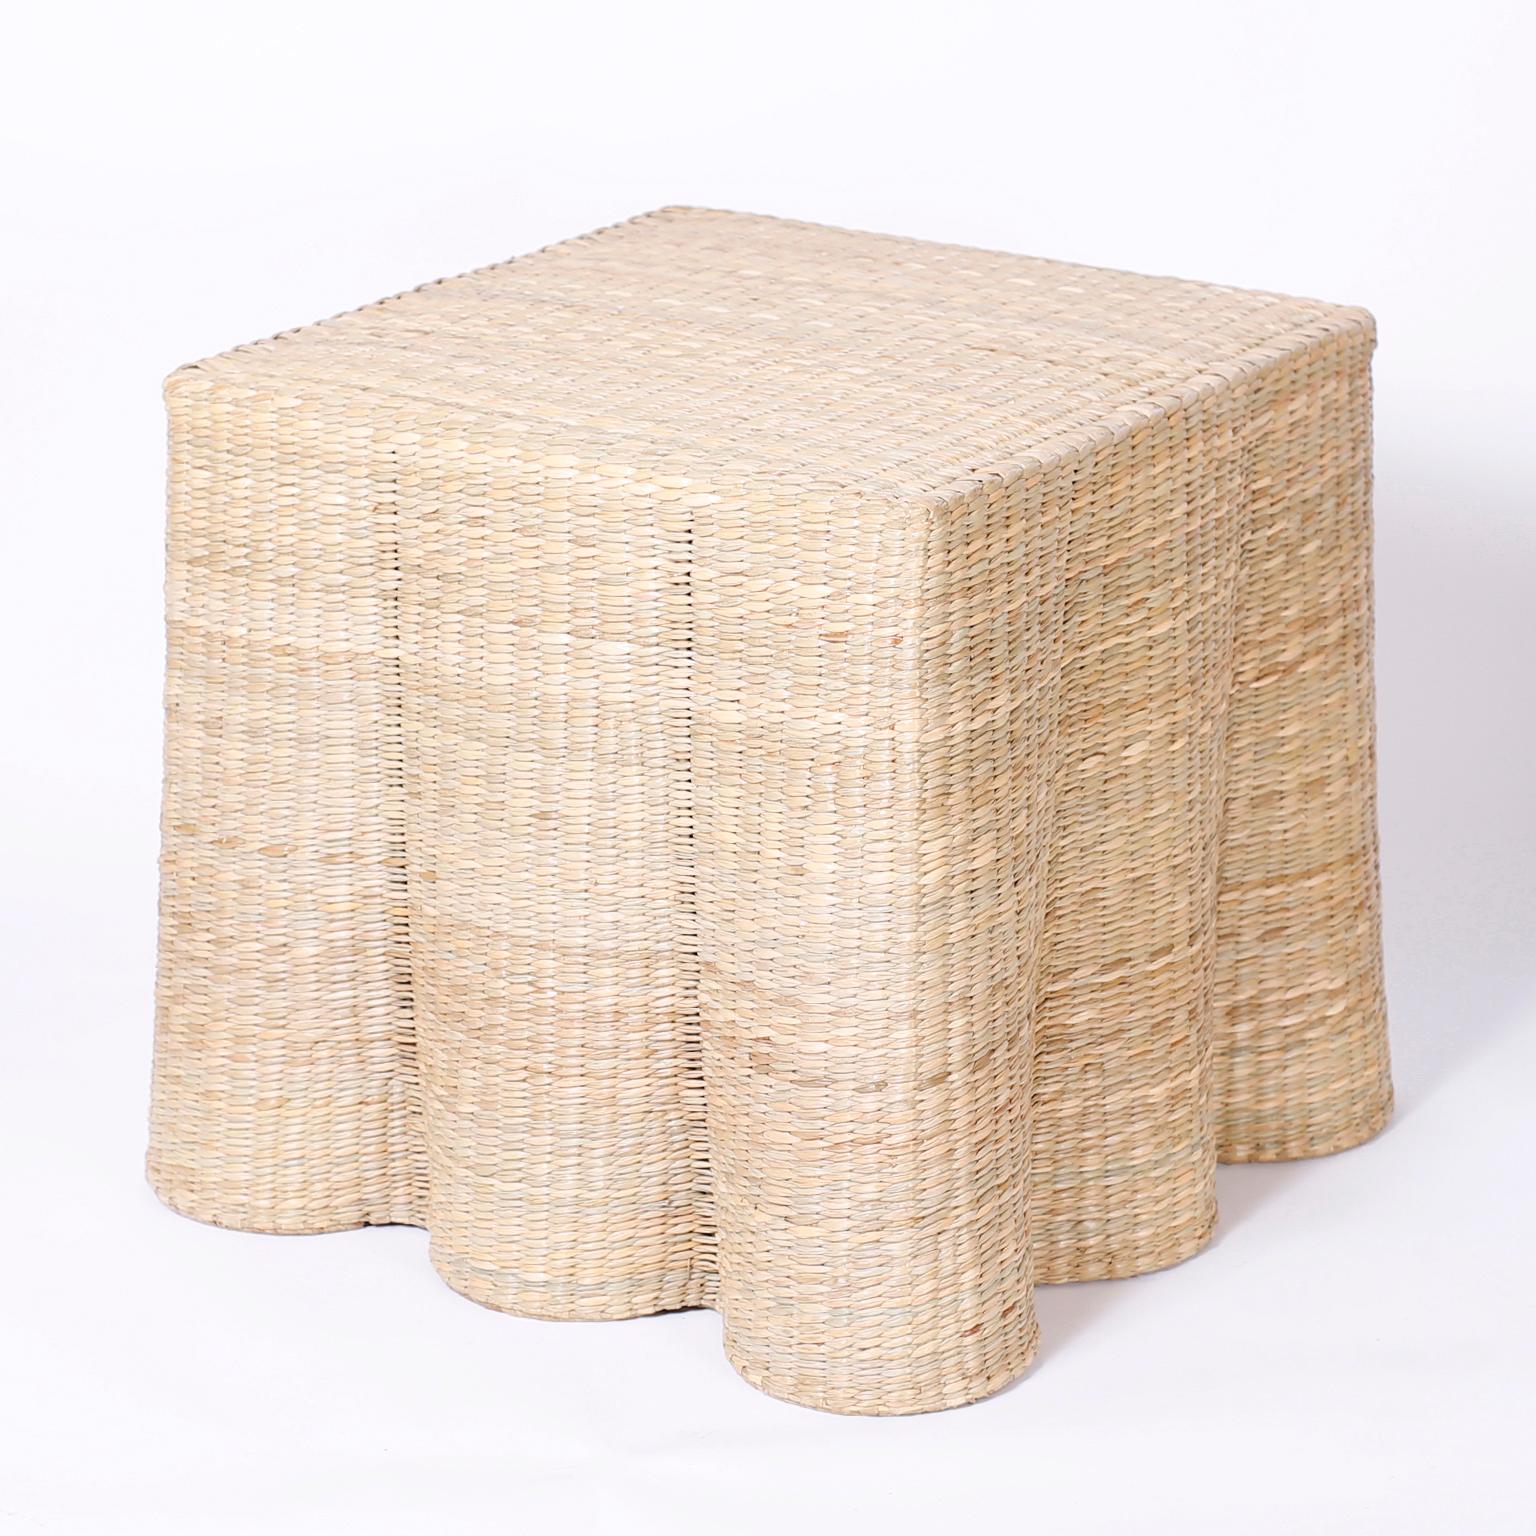 Hand-Crafted Pair of Wicker Drapery Ghost End Tables or Stands from the FS Flores Collection